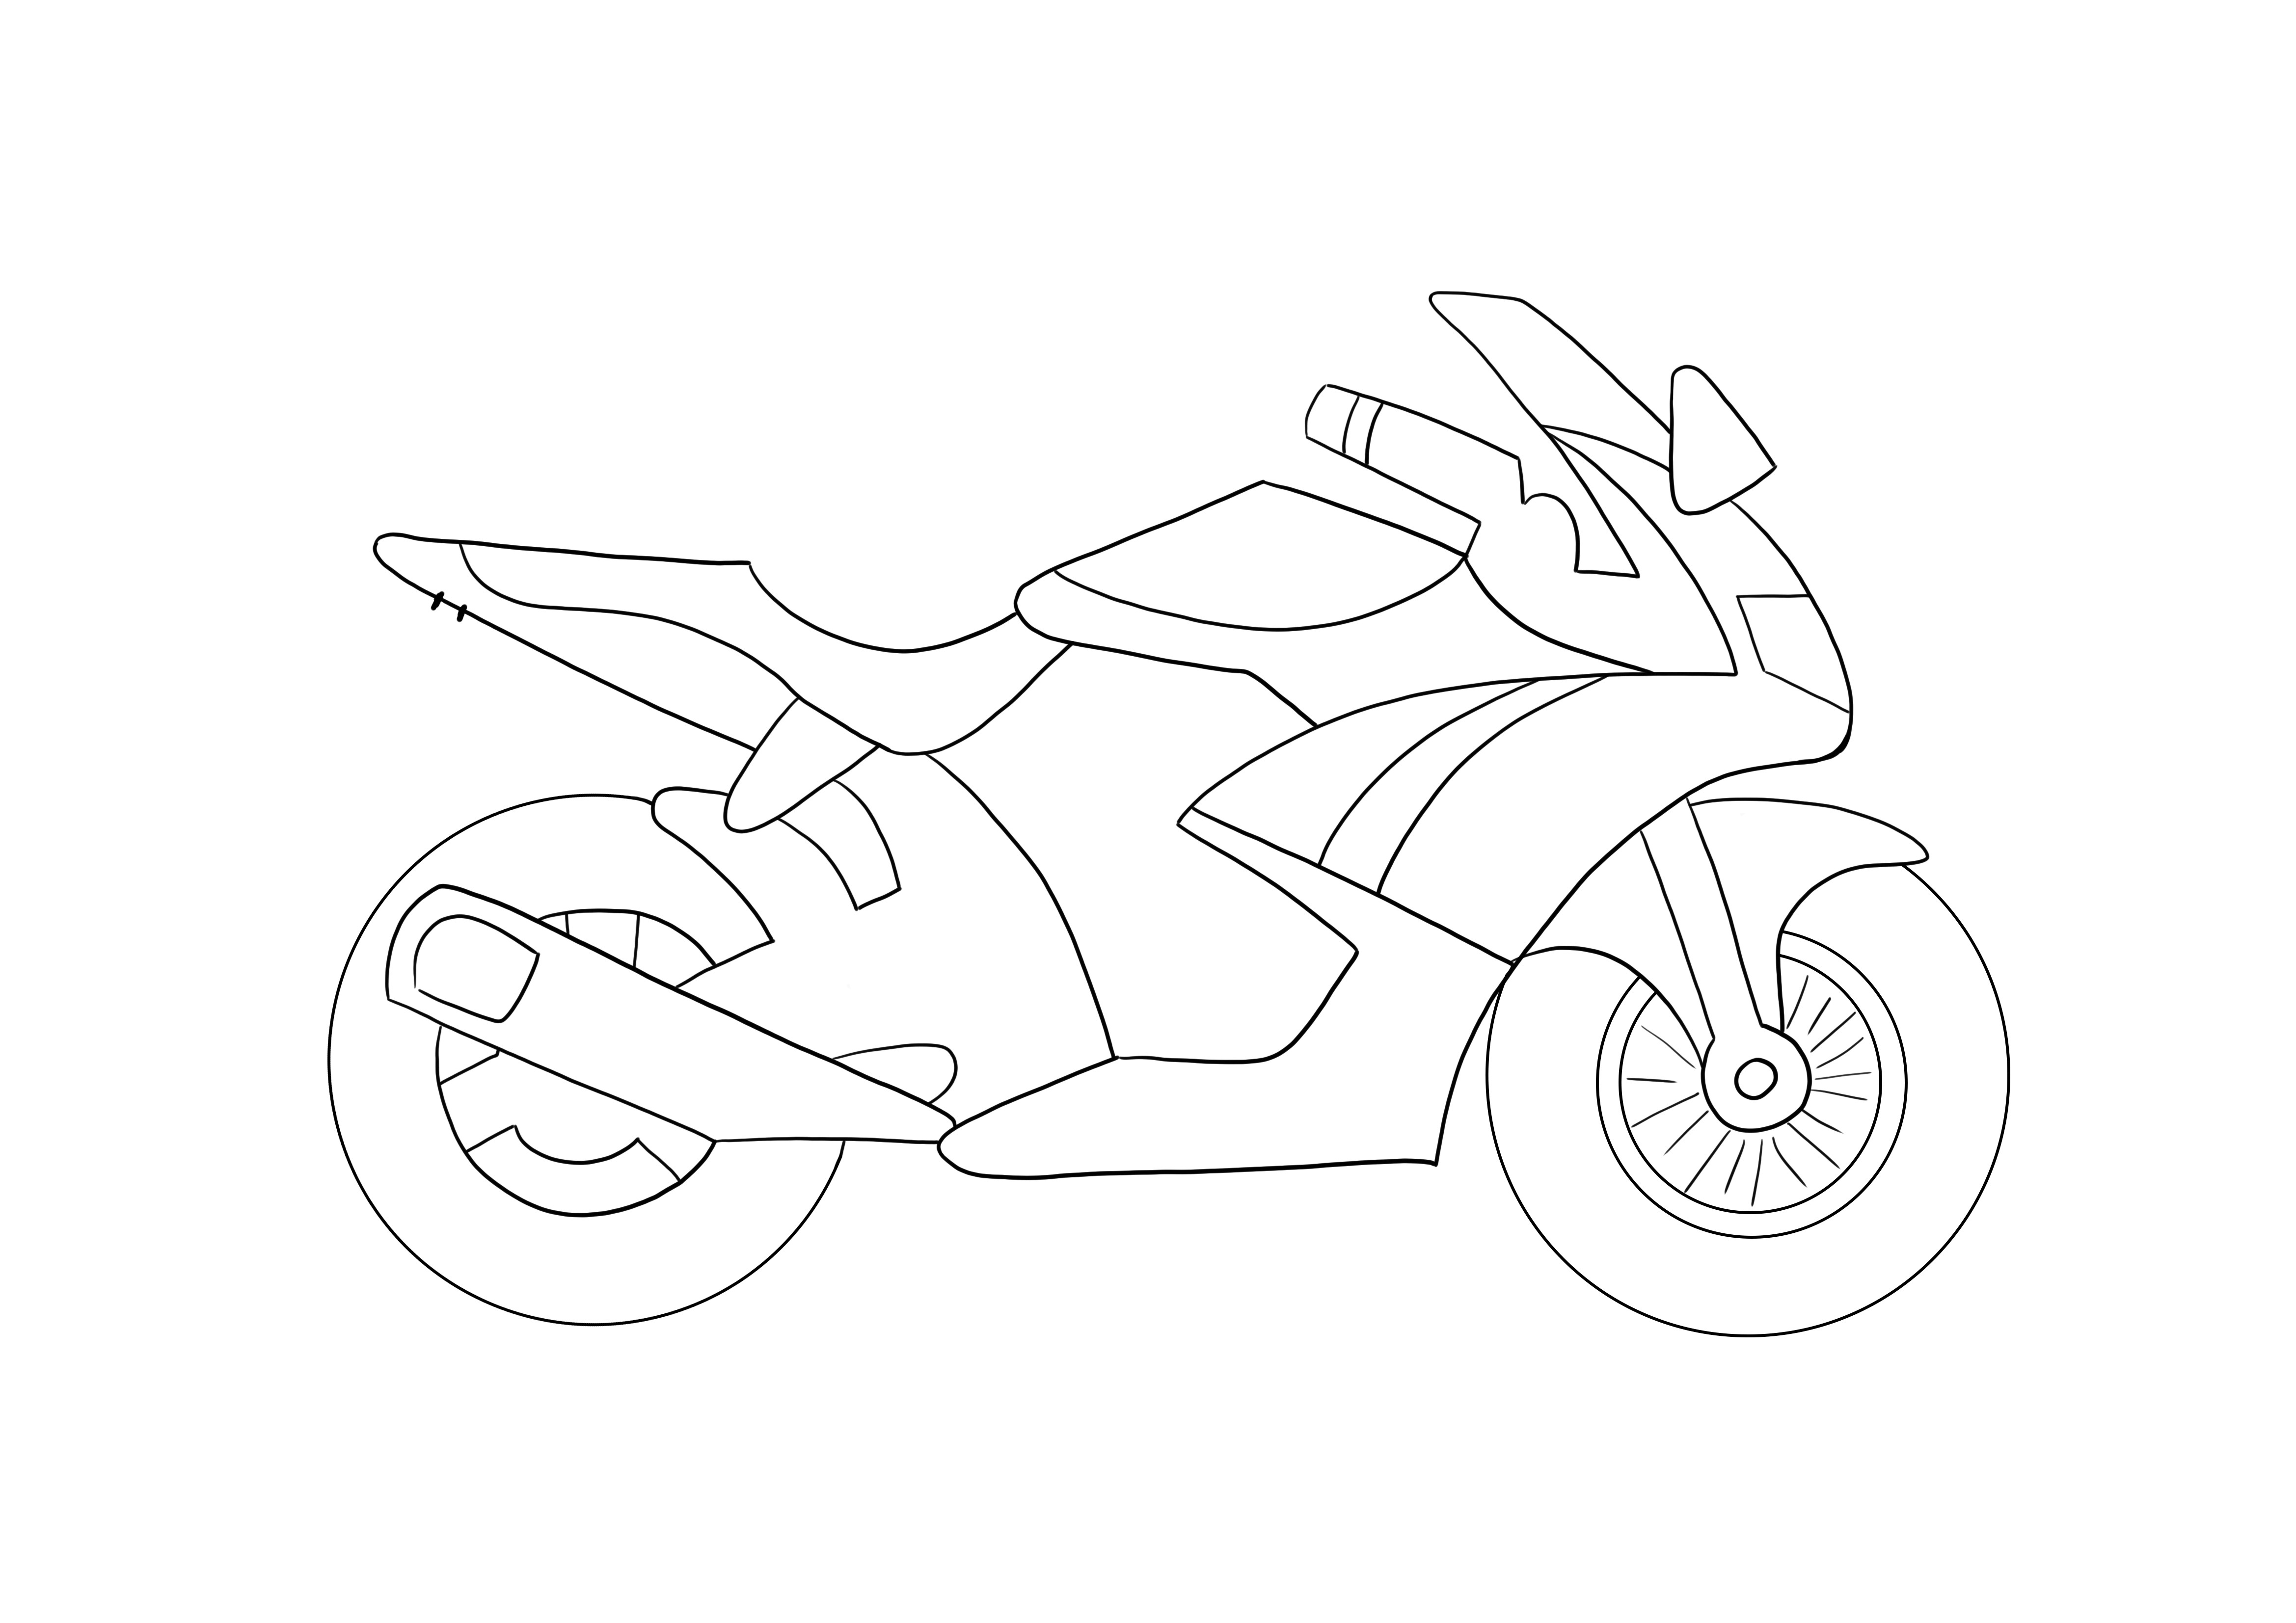 Motorcycle simple coloring for kids for free